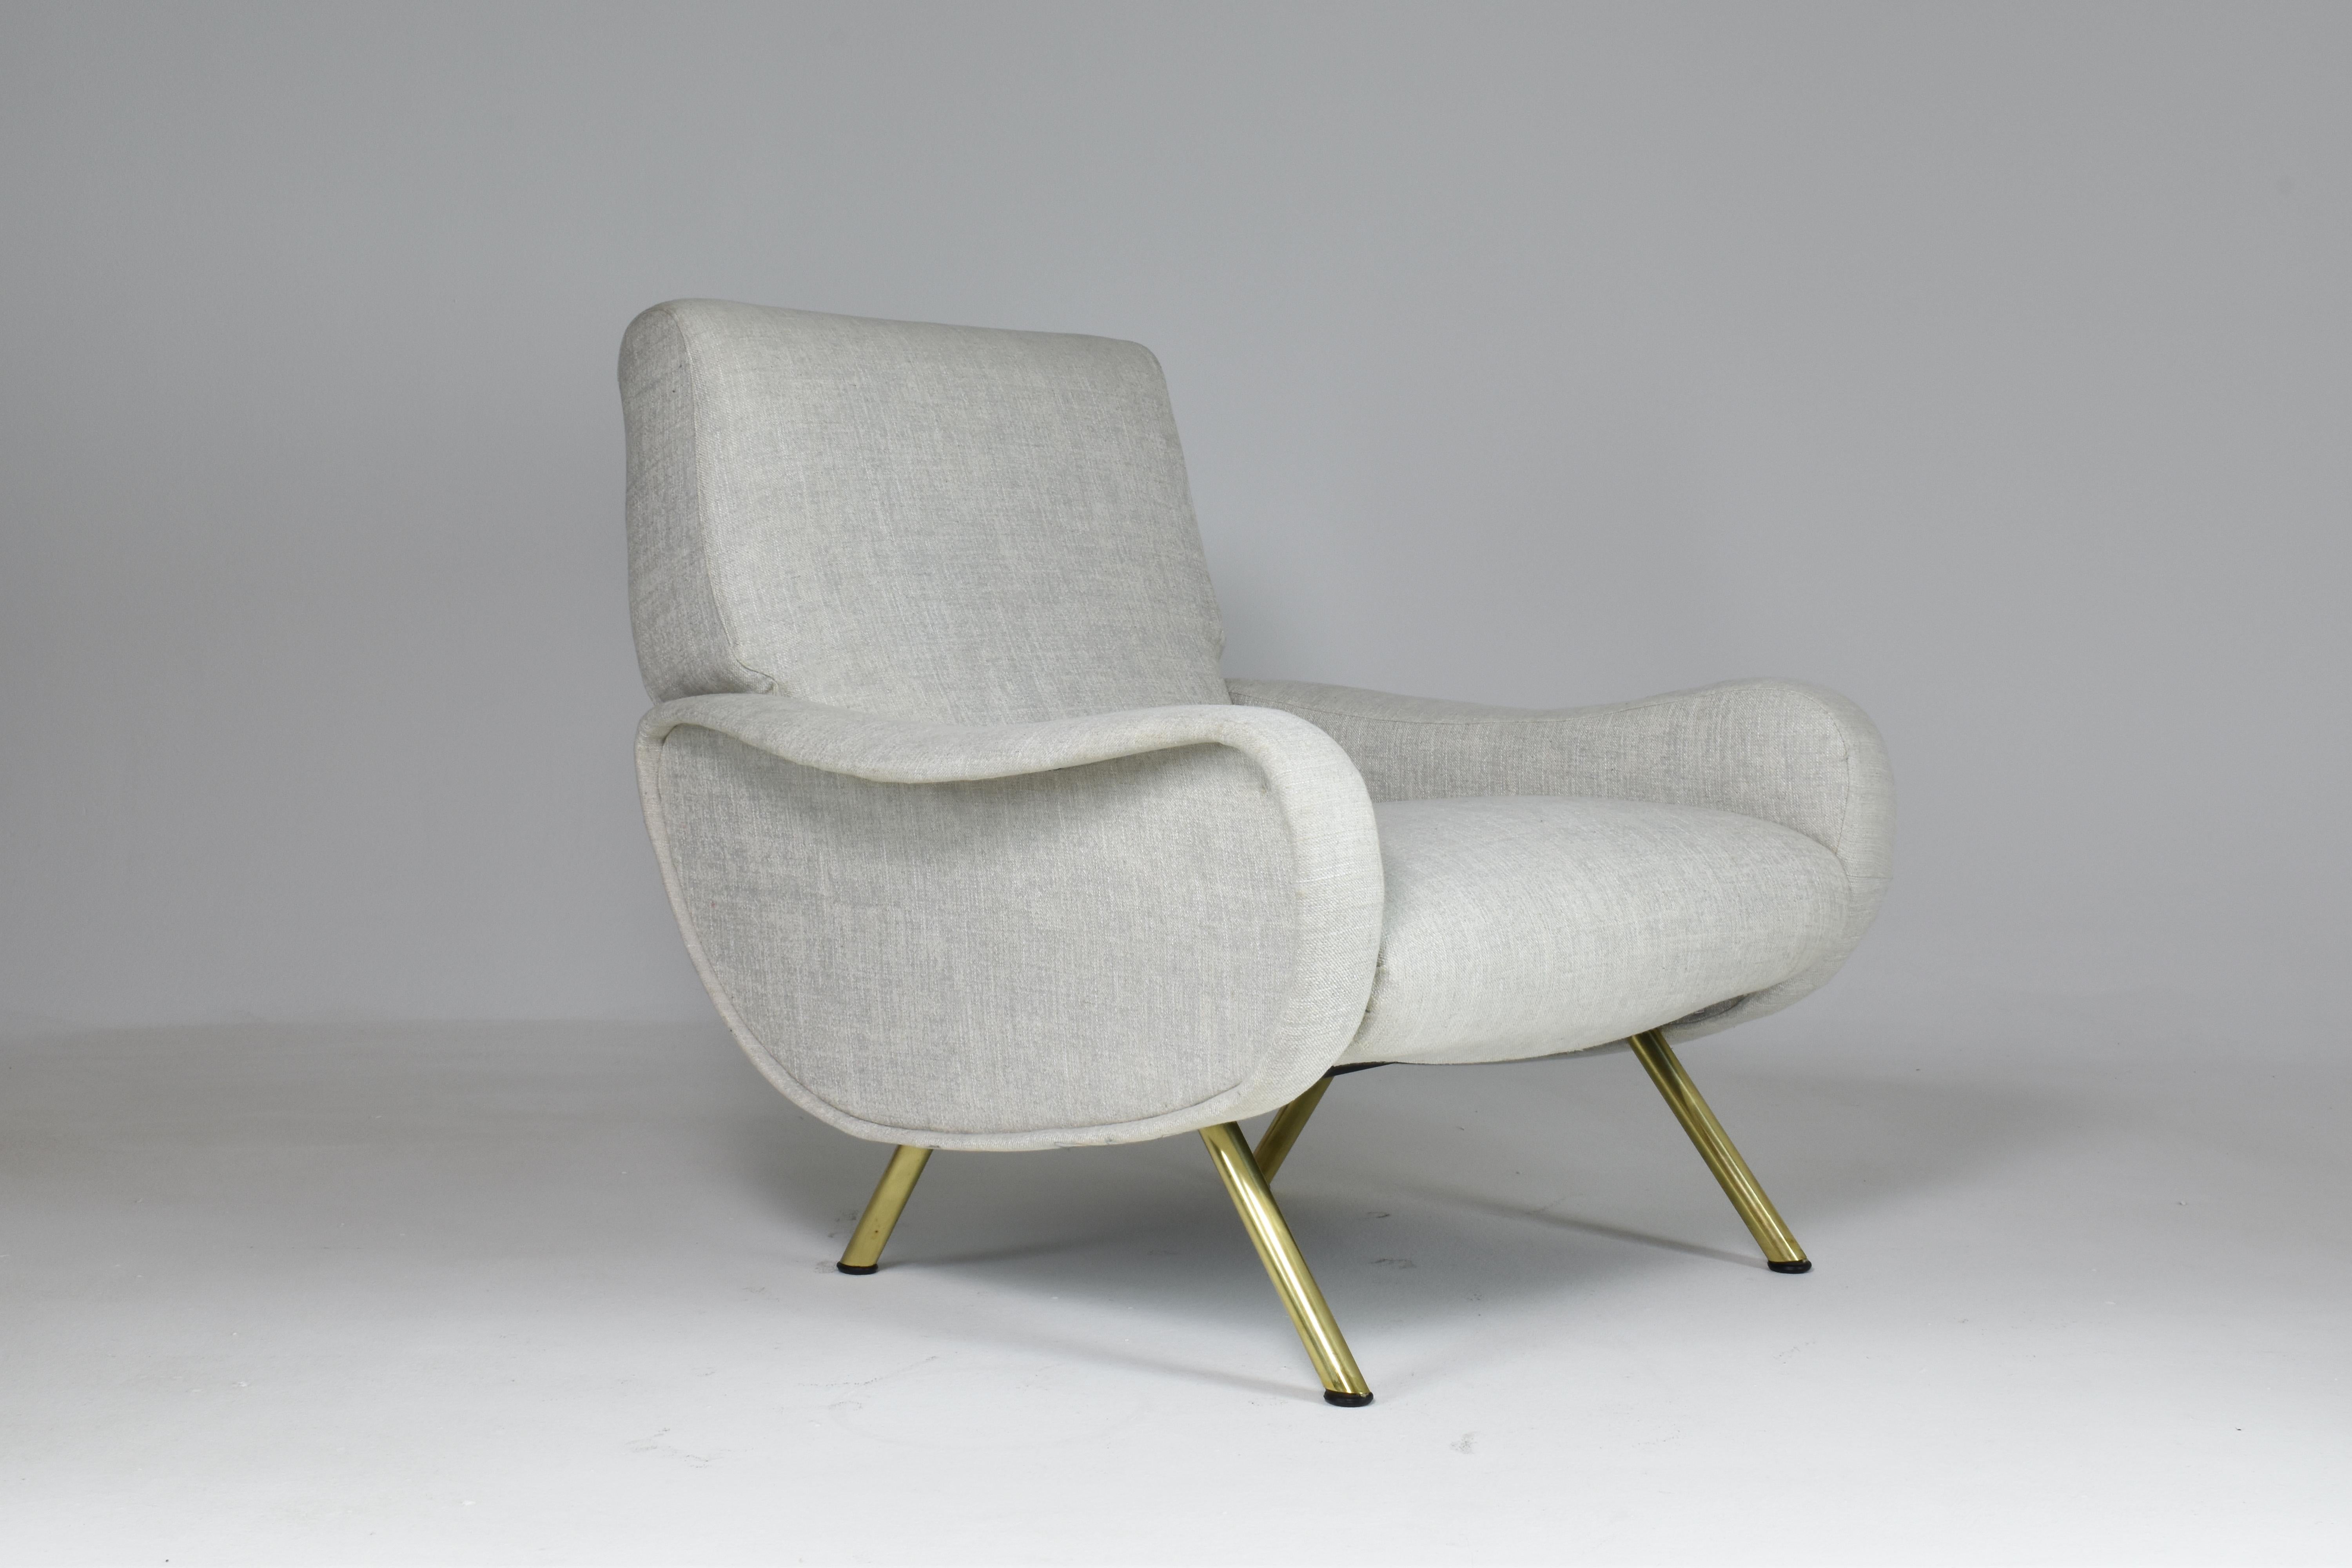 The Iconic 20th-century collectible vintage Lady chair was designed by Marco Zanuso for Arflex in Italy in 1951. The very comfortable design features splayed expertly polished brass legs and is fully restored with new foam padding in a light grey